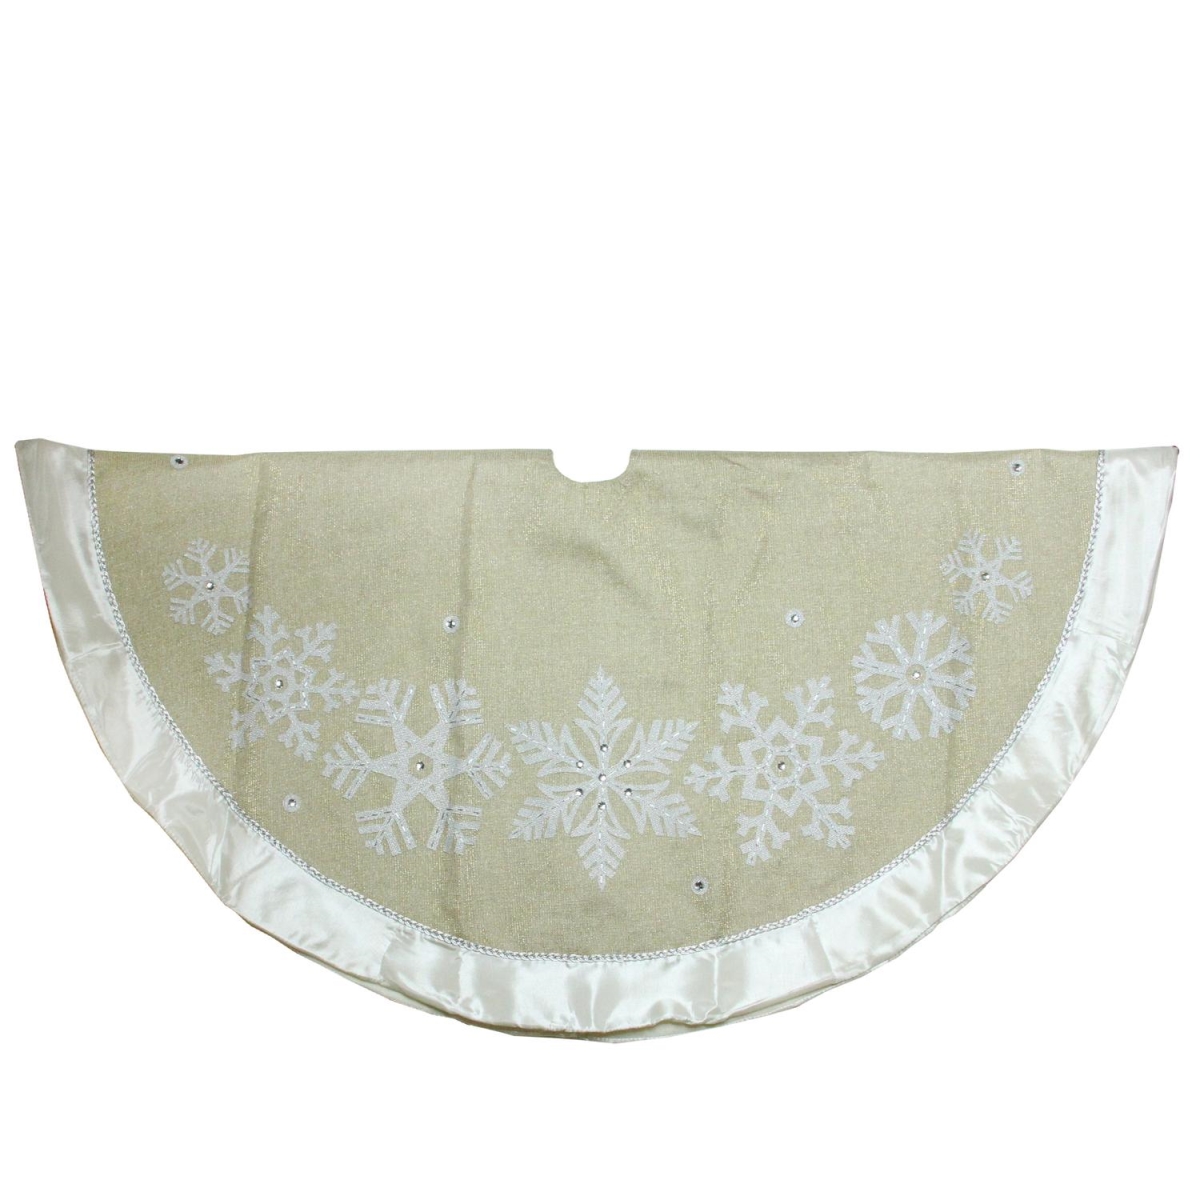 Picture of Dyno 32629165 48 in. Metallic Gold & Silver Snowflake with Satin Border Linen Christmas Tree Skirt